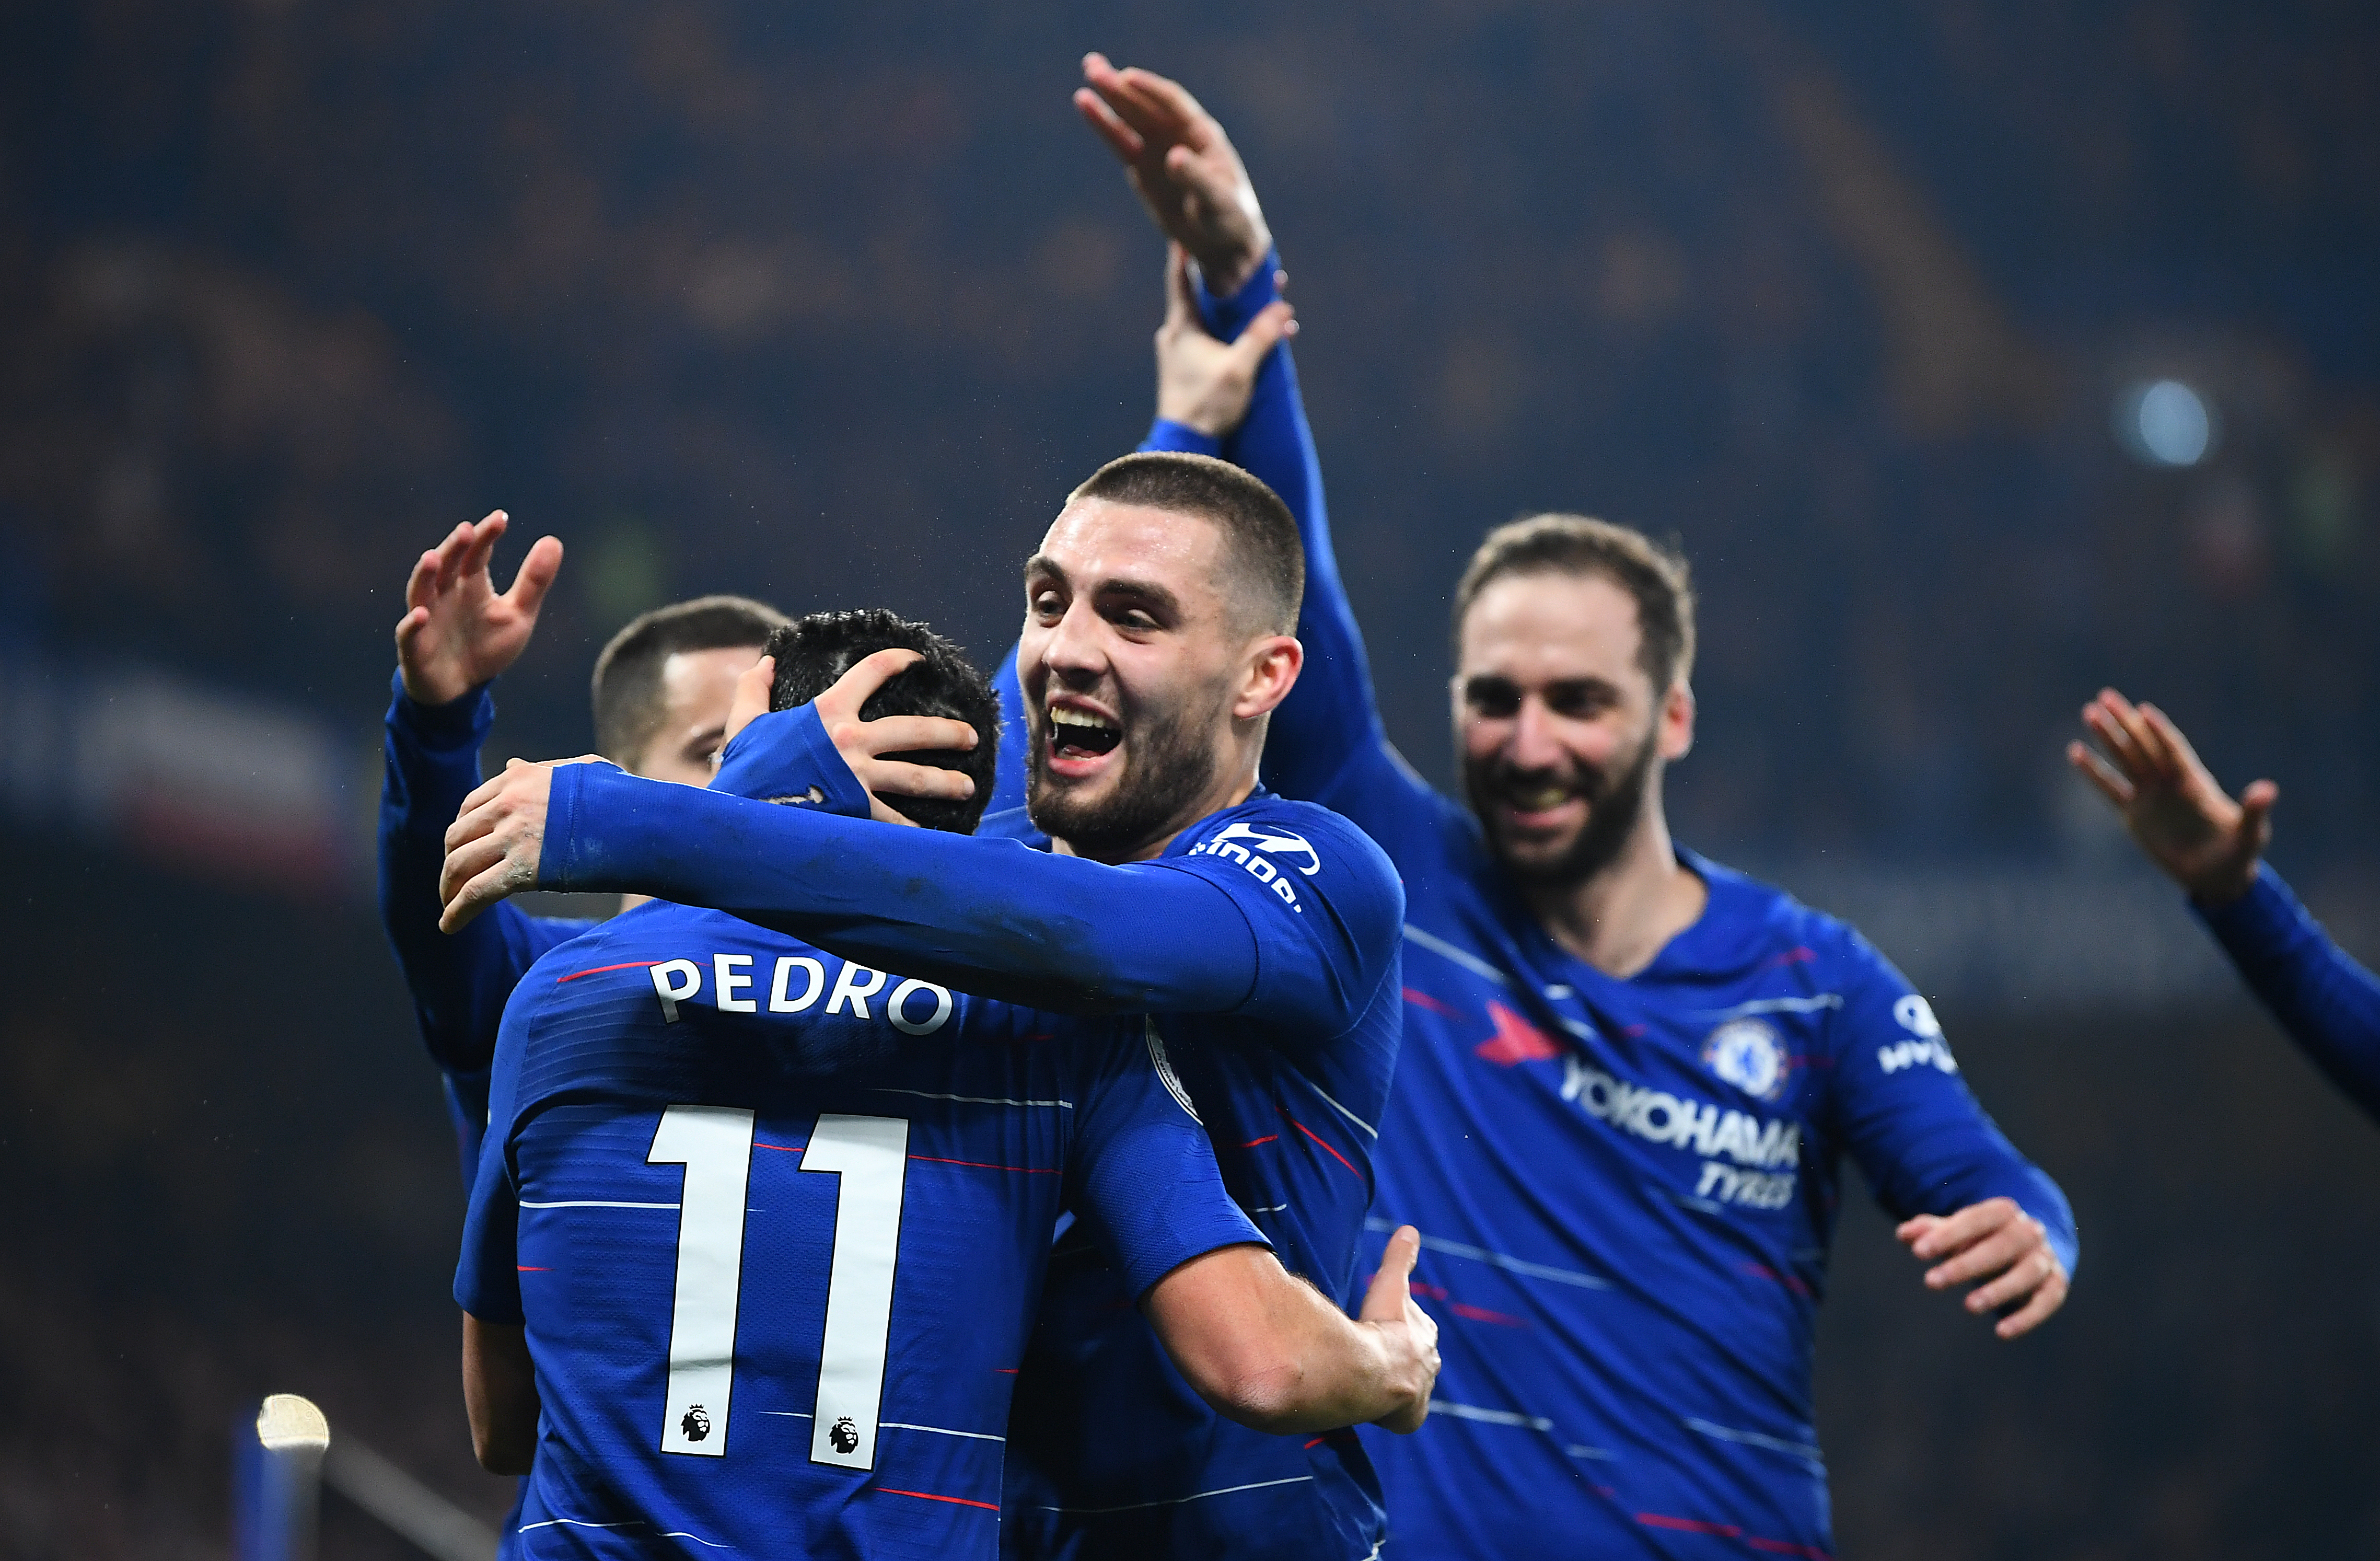 LONDON, ENGLAND - FEBRUARY 27:  Pedro of Chelsea celebrates after scoring his team's first goal during the Premier League match between Chelsea FC and Tottenham Hotspur at Stamford Bridge on February 27, 2019 in London, United Kingdom. (Photo by Clive Mason/Getty Images)